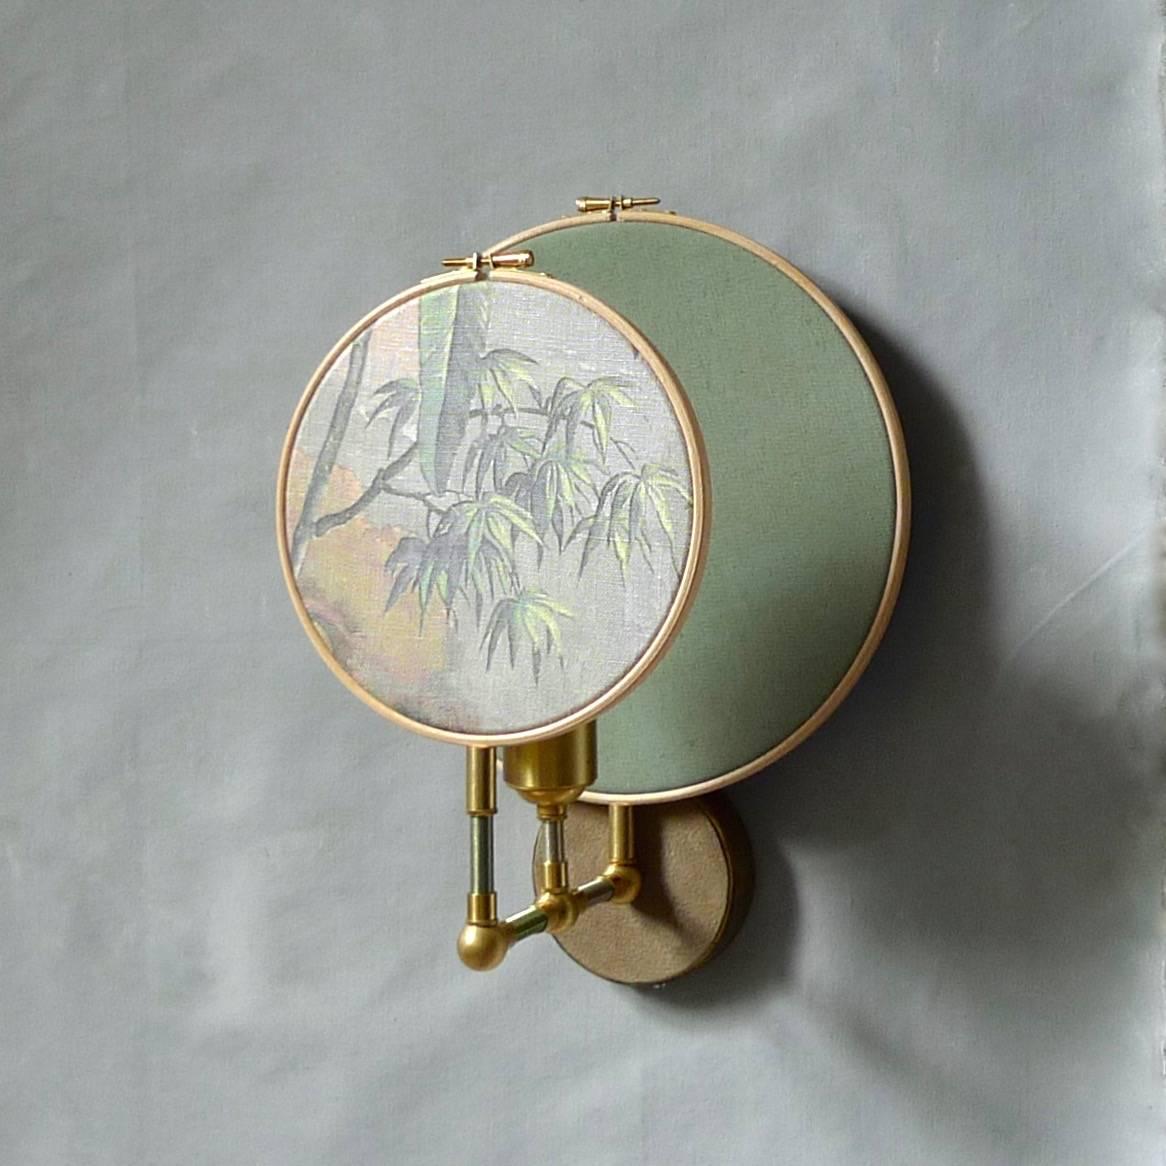 Circle blue grey, wall sconce, Sander Bottinga circle blue grey, wall sconce, Sander Bottinga
Handmade in brass, leather, wood and hand printed and painted linen.
A dimmer is inlaid with leather. Also possible without a dimmer
Dimensions: H 35 x